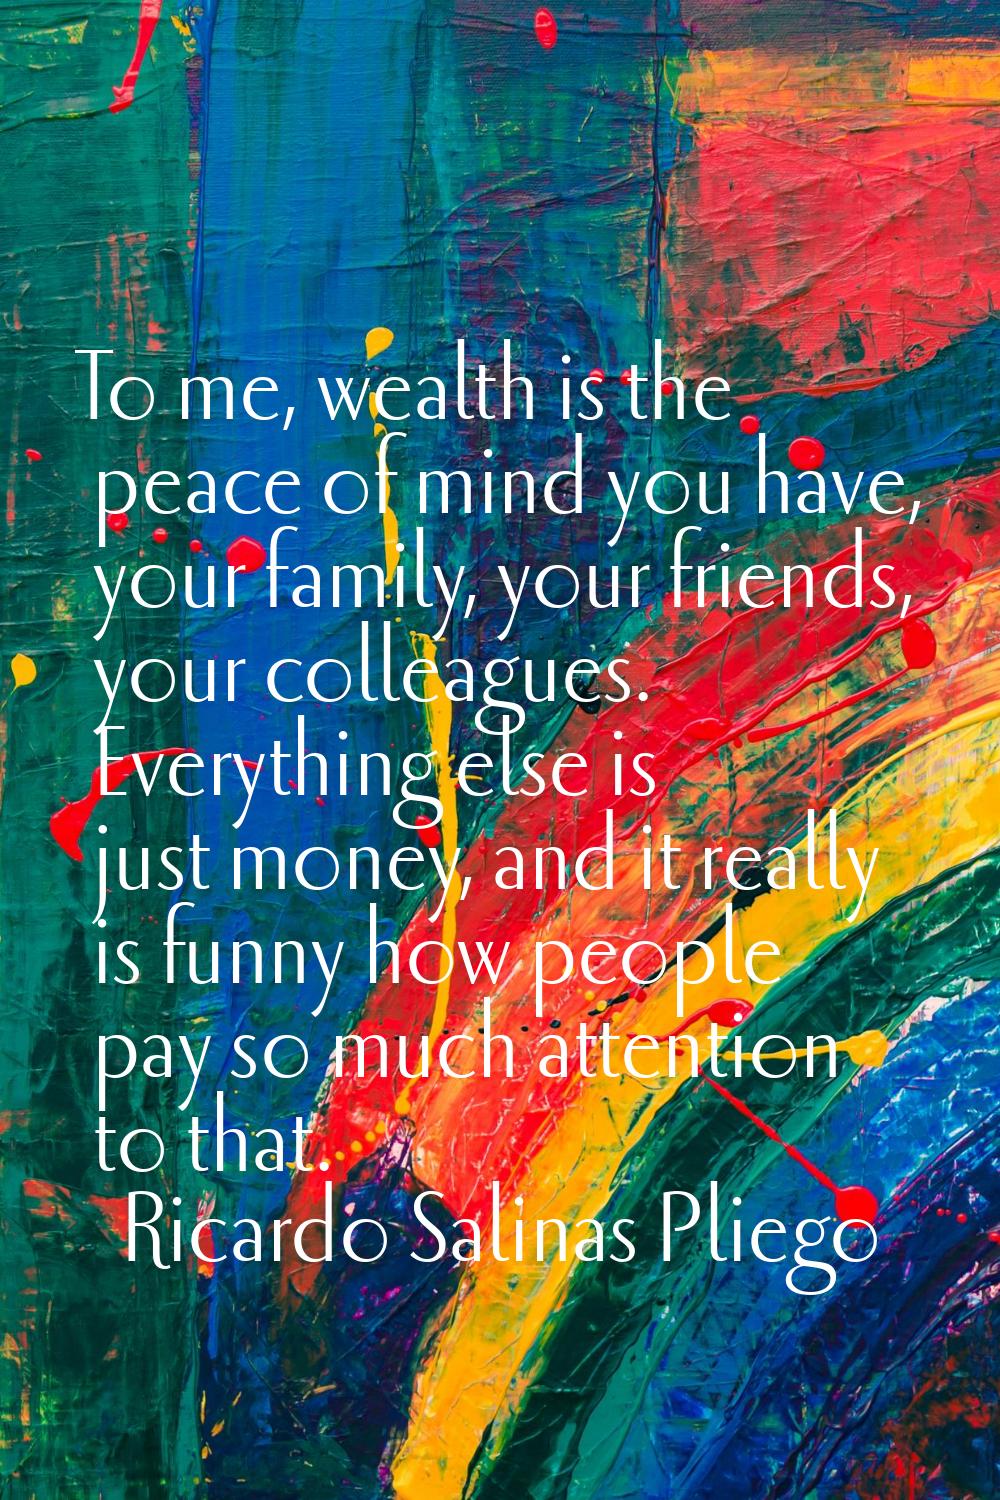 To me, wealth is the peace of mind you have, your family, your friends, your colleagues. Everything